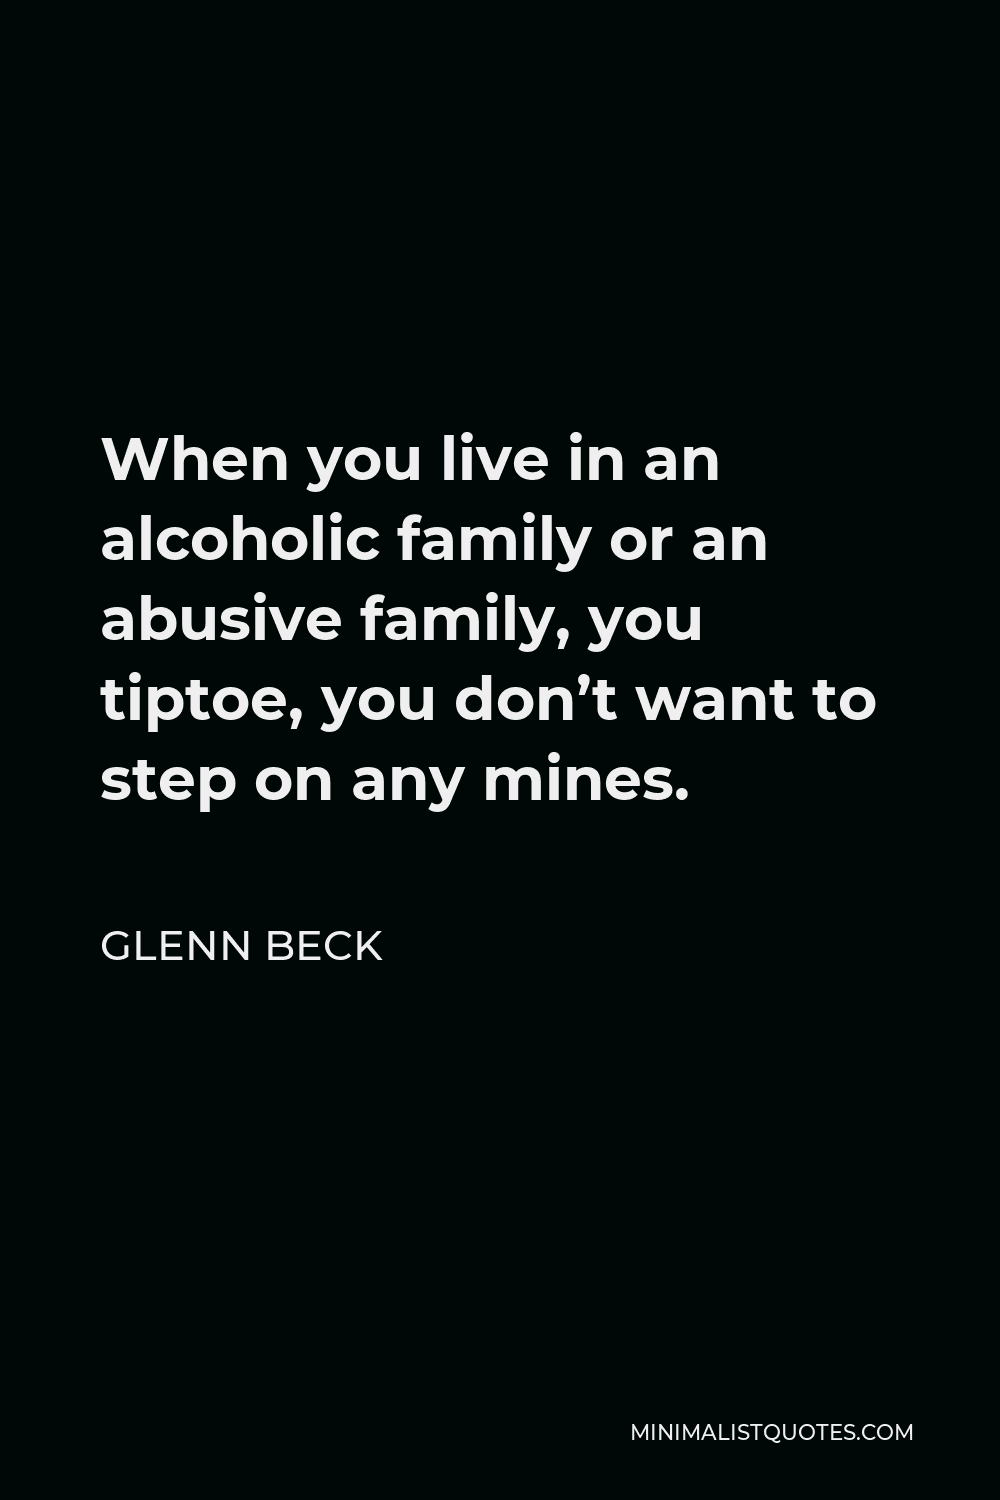 Glenn Beck Quote - When you live in an alcoholic family or an abusive family, you tiptoe, you don’t want to step on any mines.